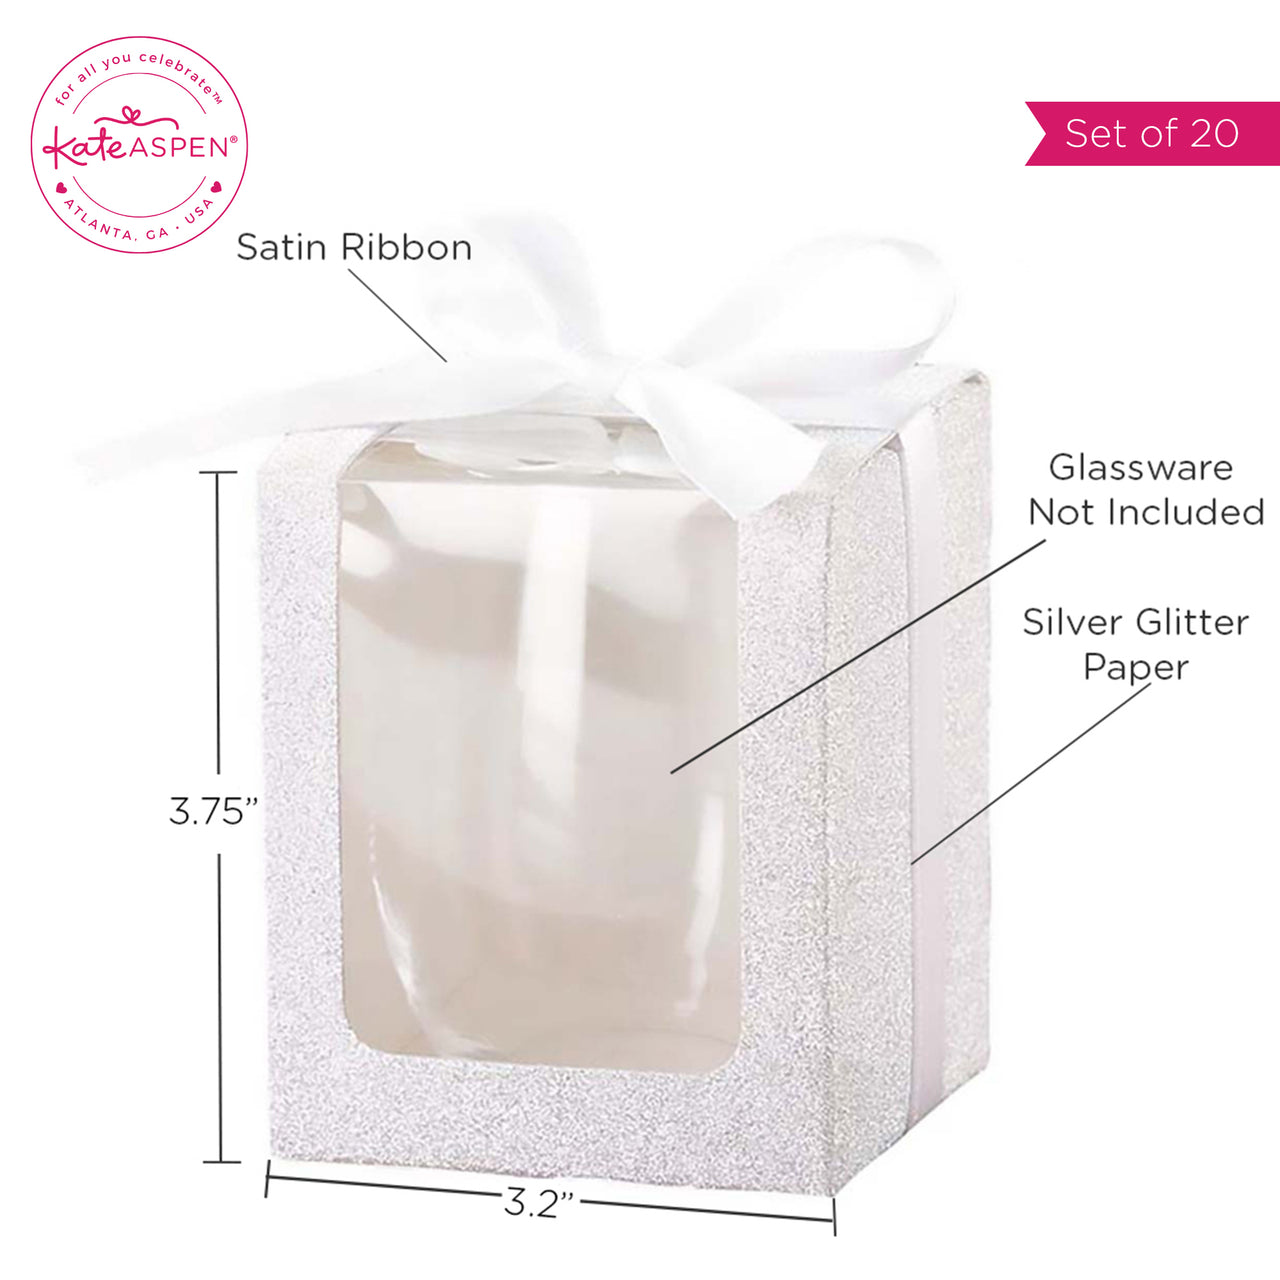 Candle Packaging & Glassware Gift Presentation Boxes